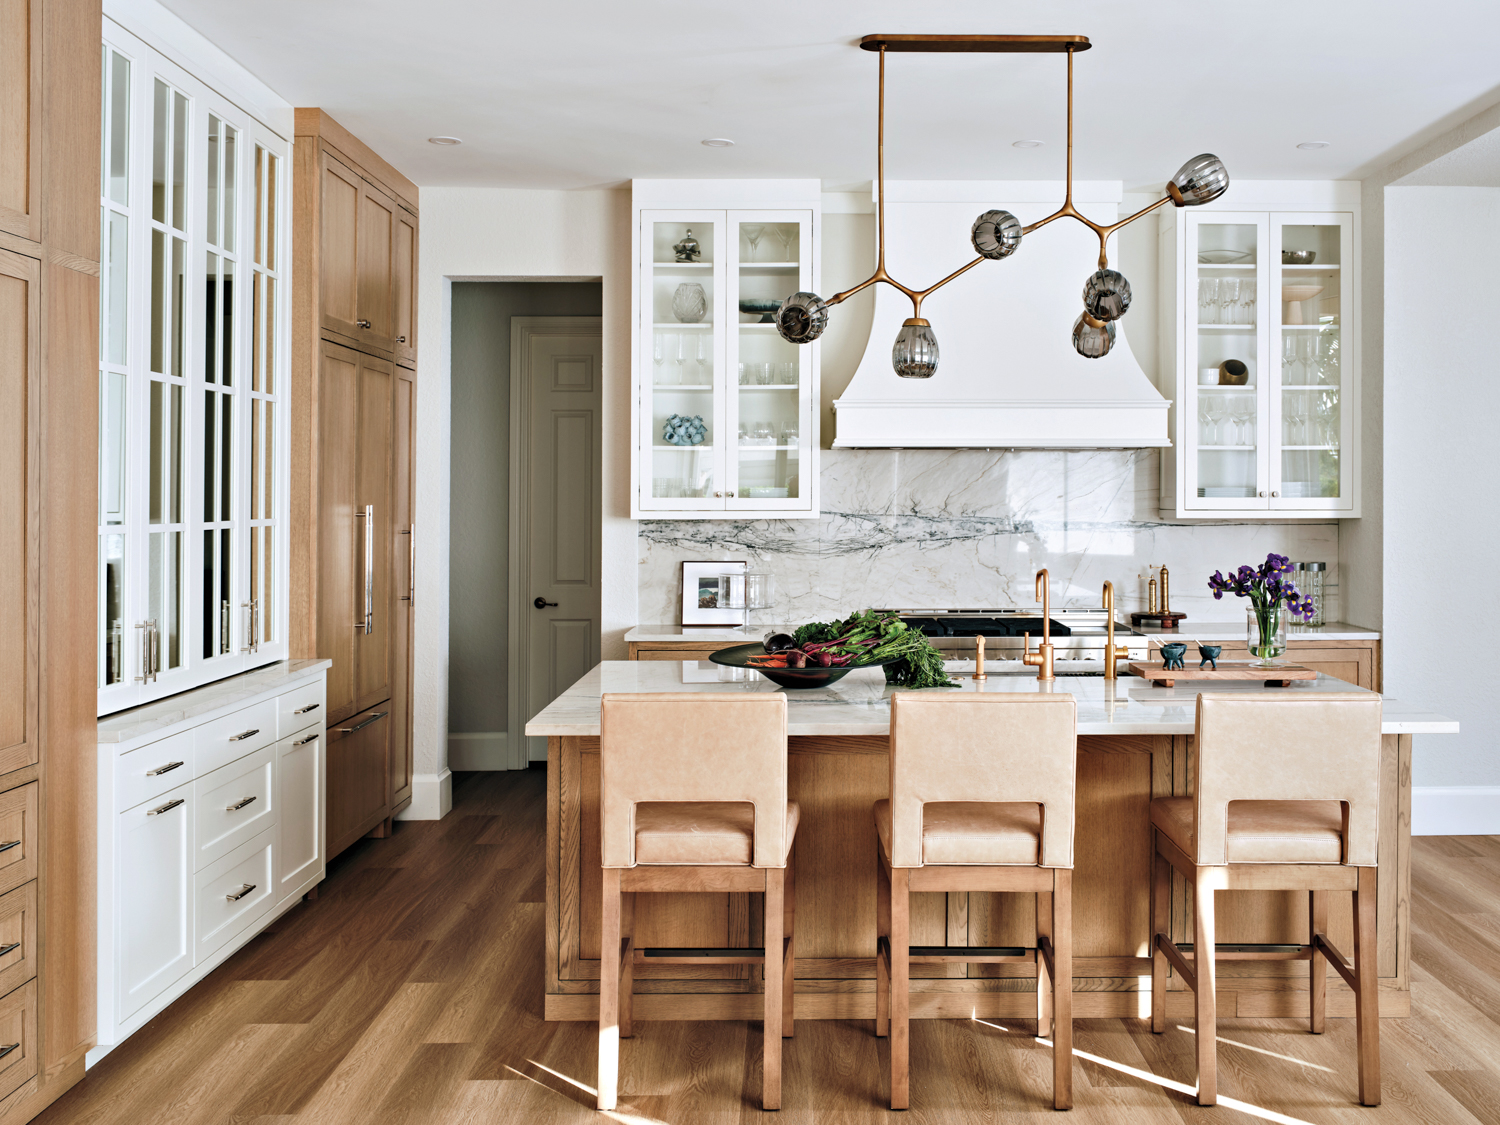 Kitchen with wood floors, island and chairs balanced with white cabinetry, a marble backsplash and a chandelier